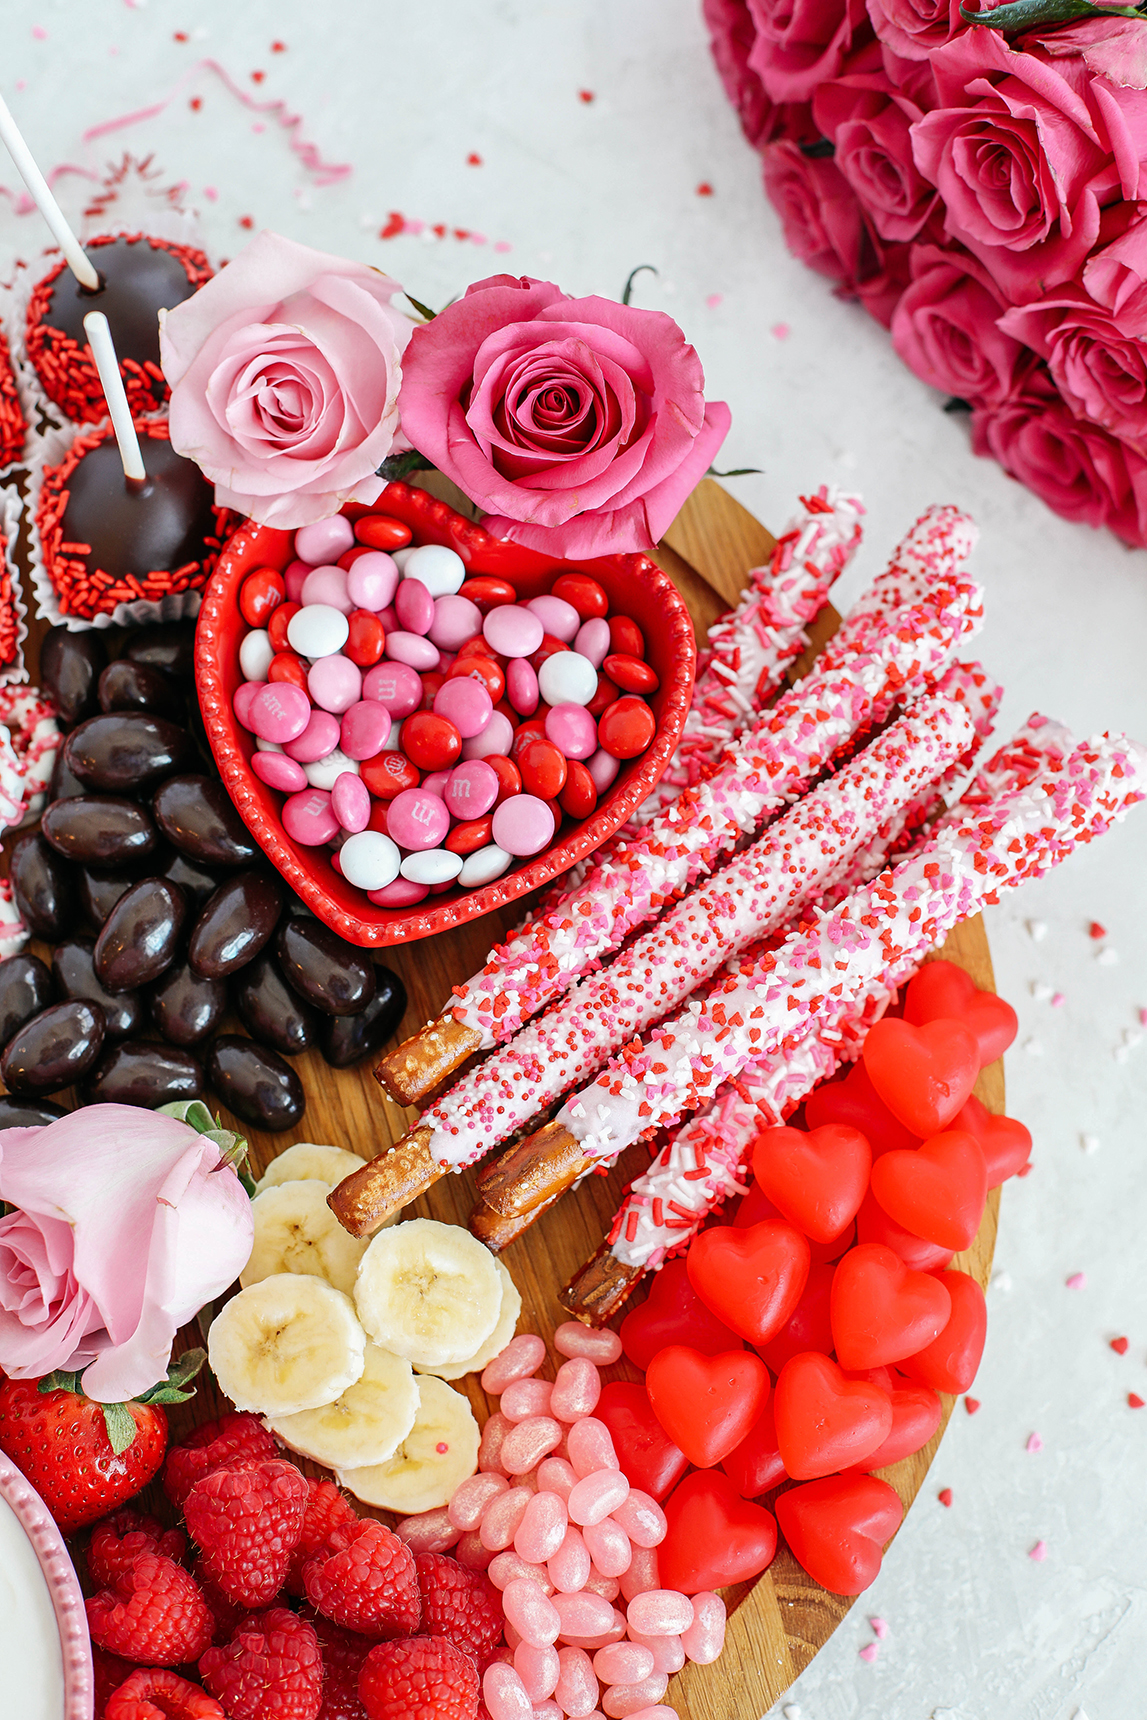 Celebrate Valentine's Day with a fun and festive dessert board made with healthier options like yogurt-dipped pretzels, chocolate covered almonds, fresh fruit and a honey yogurt dipping sauce!